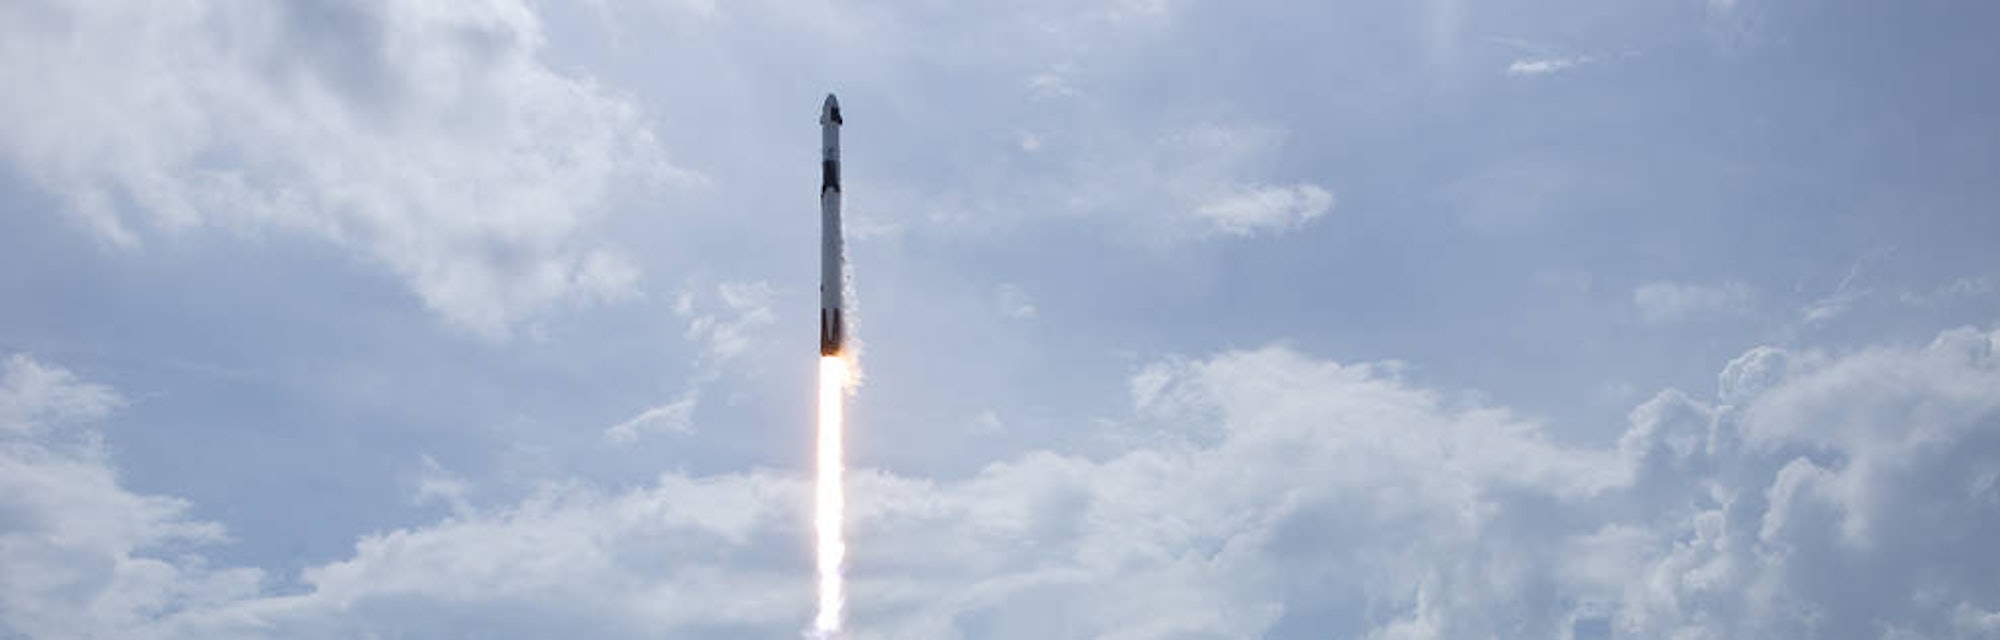 spacex crew dragon launch may 2020